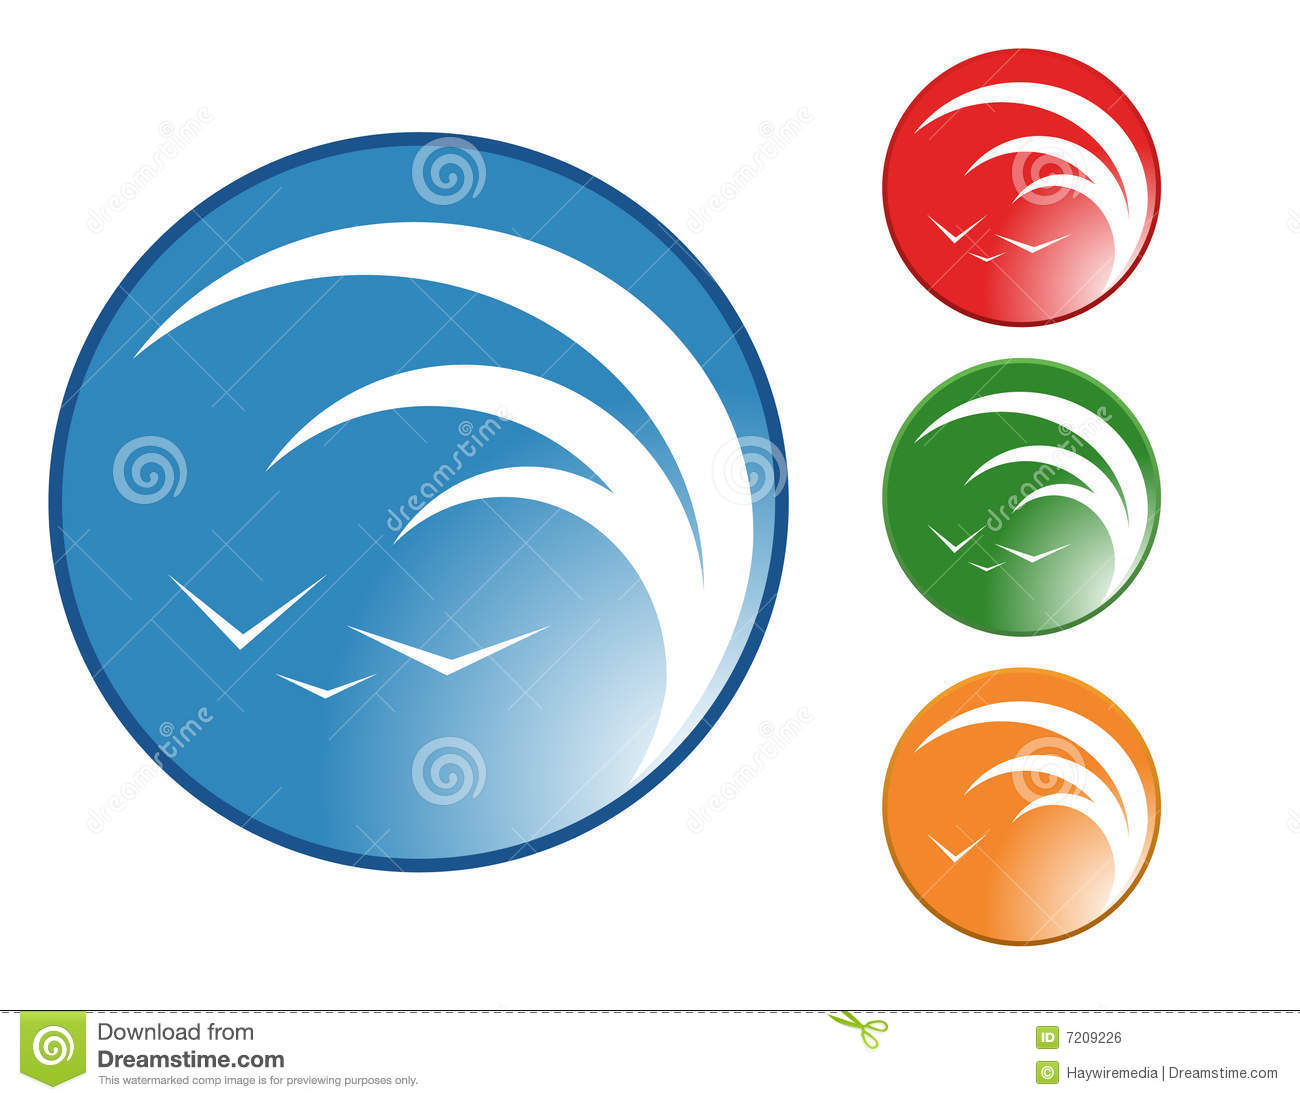 Circle With A Tidal Wave And Birds In The Sky Are Enclosed In A Circle